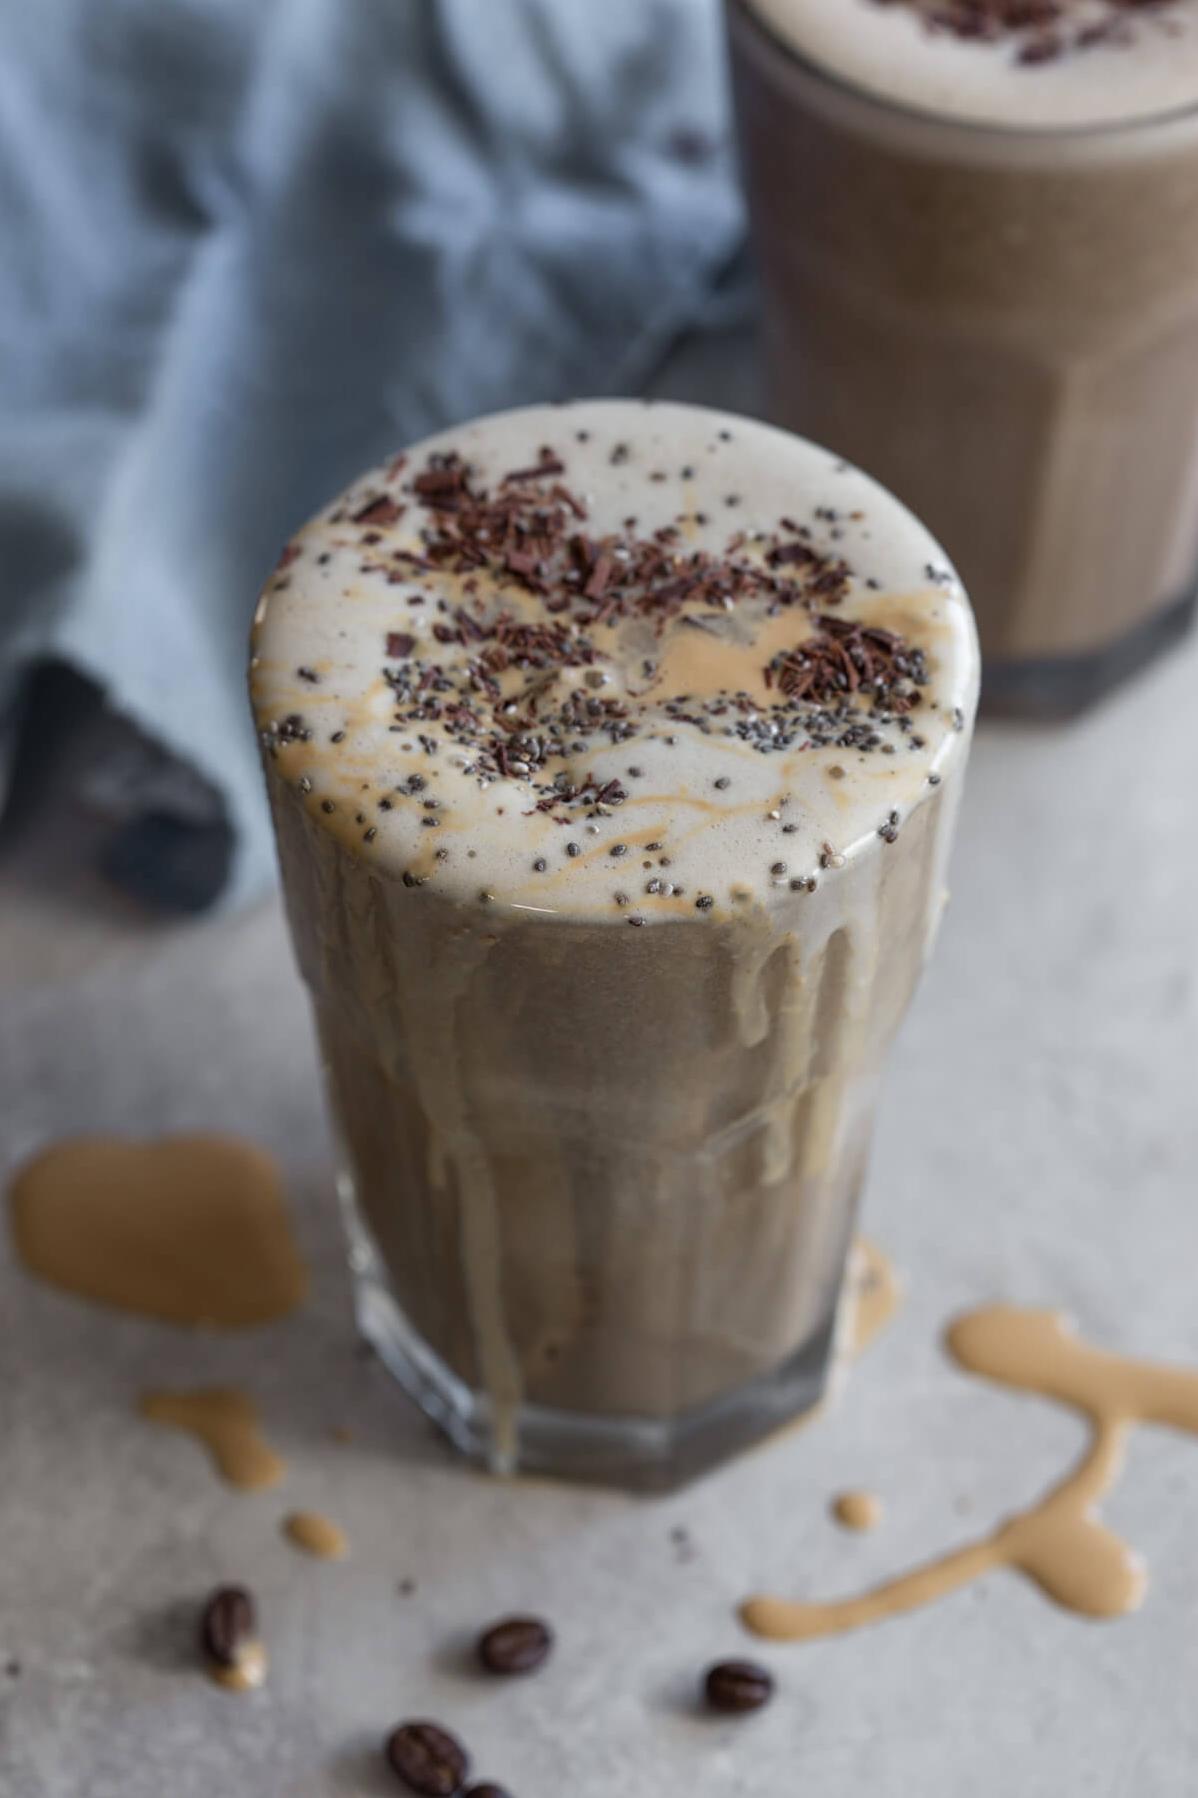  Treat yourself with this Vanilla Cappuccino Shake, which tastes more like a dessert than a protein shake.